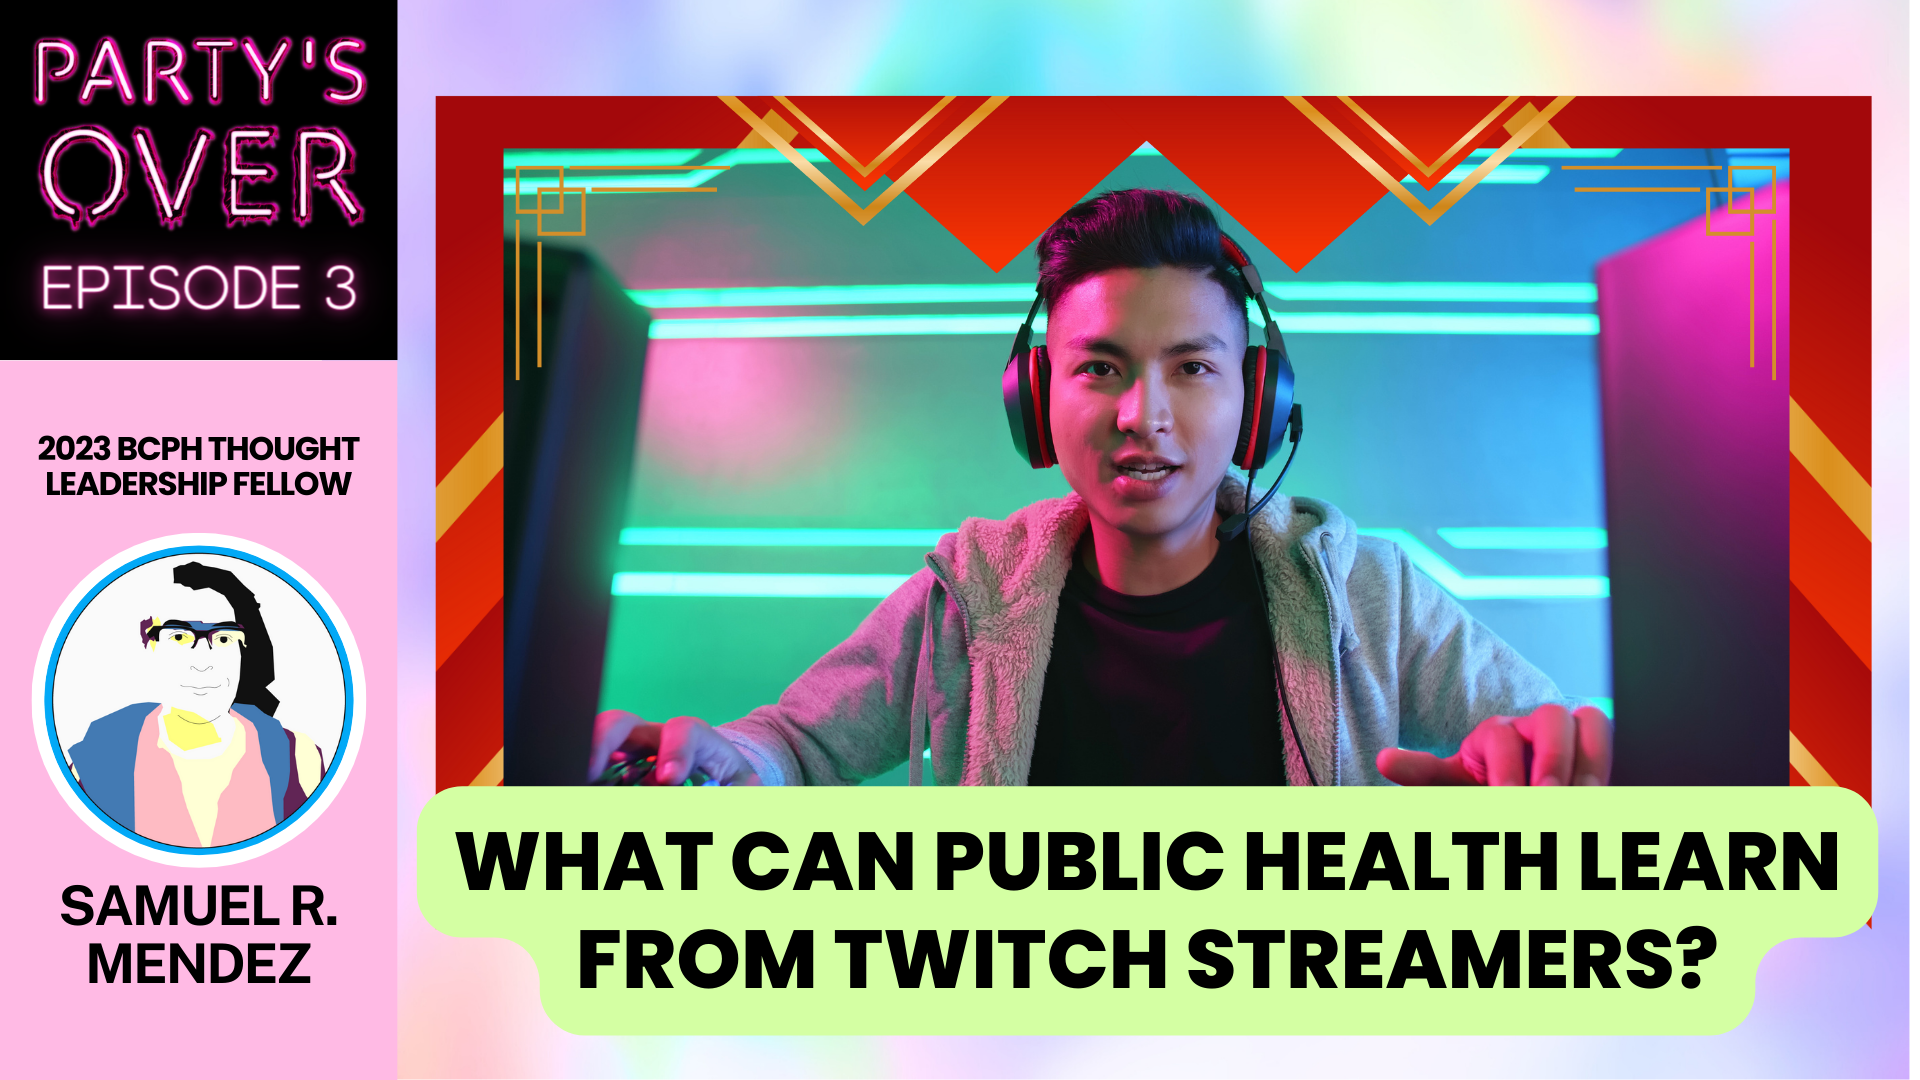 What Can Twitch Streamers teach Public Health Professionals?